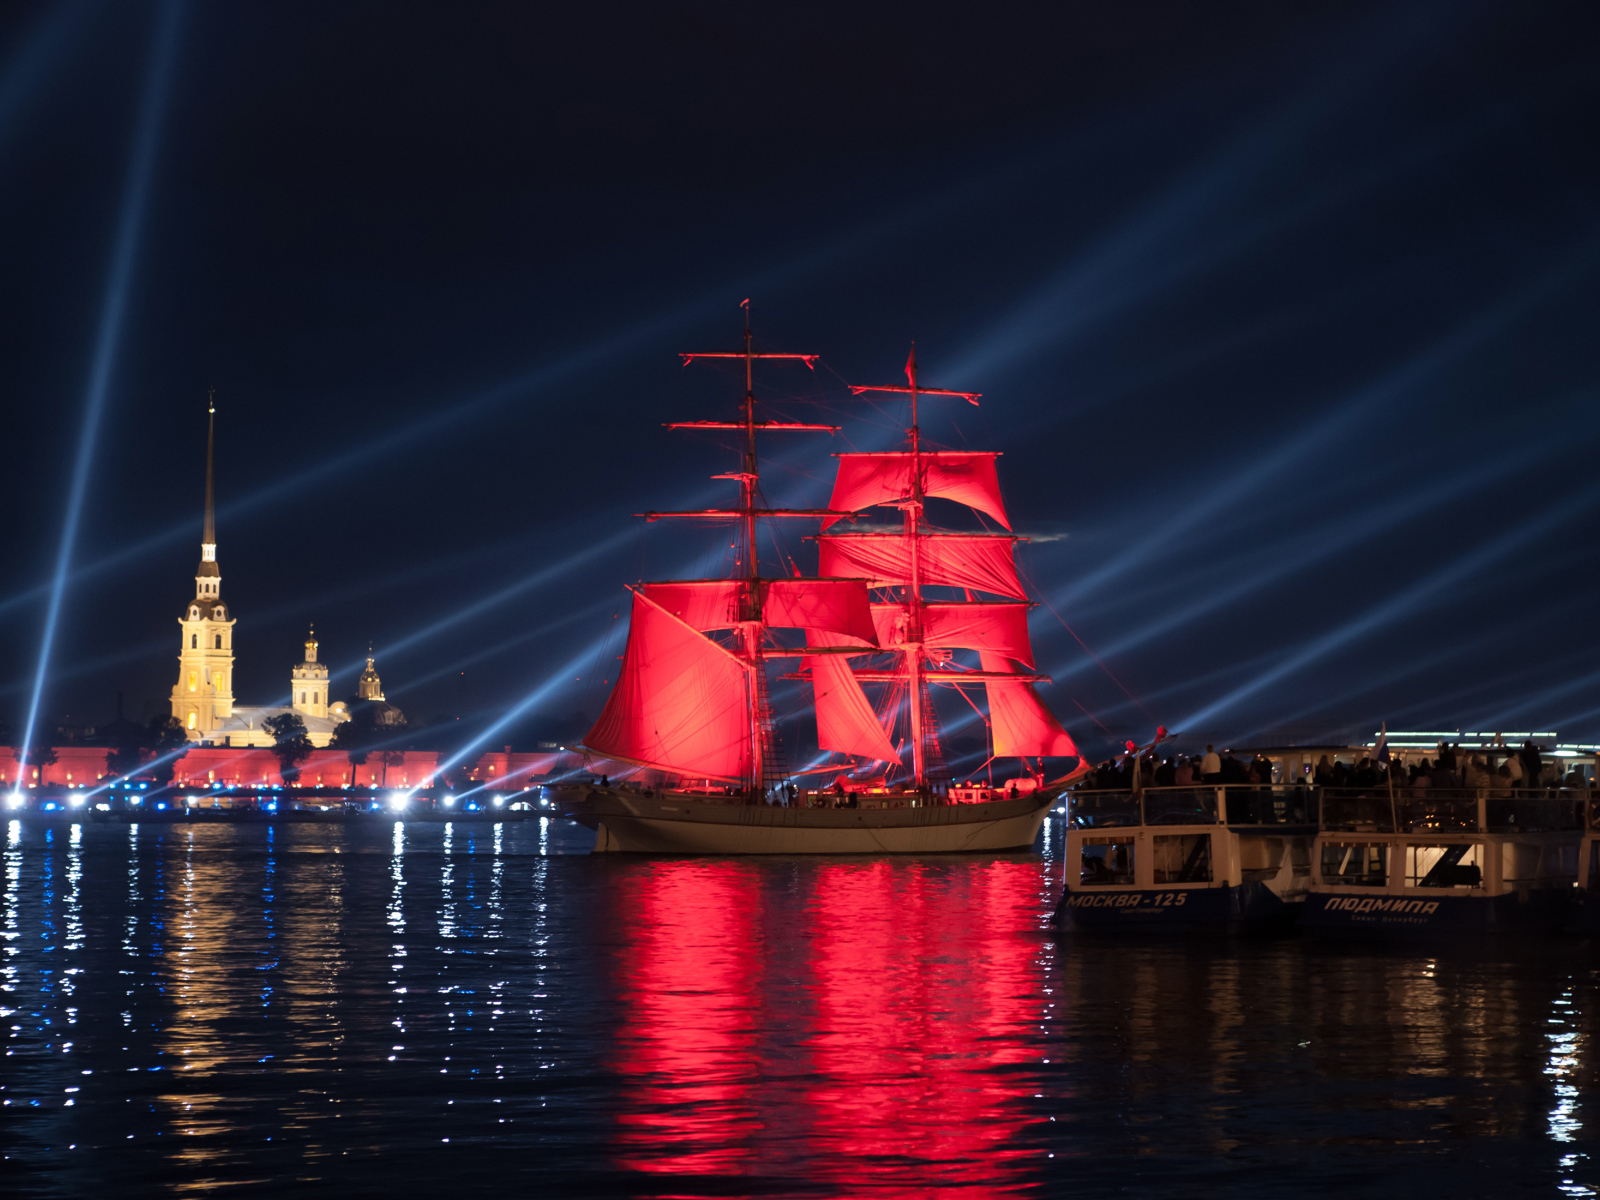 Sailing ship with scarlet sails, St. Petersburg. Russia